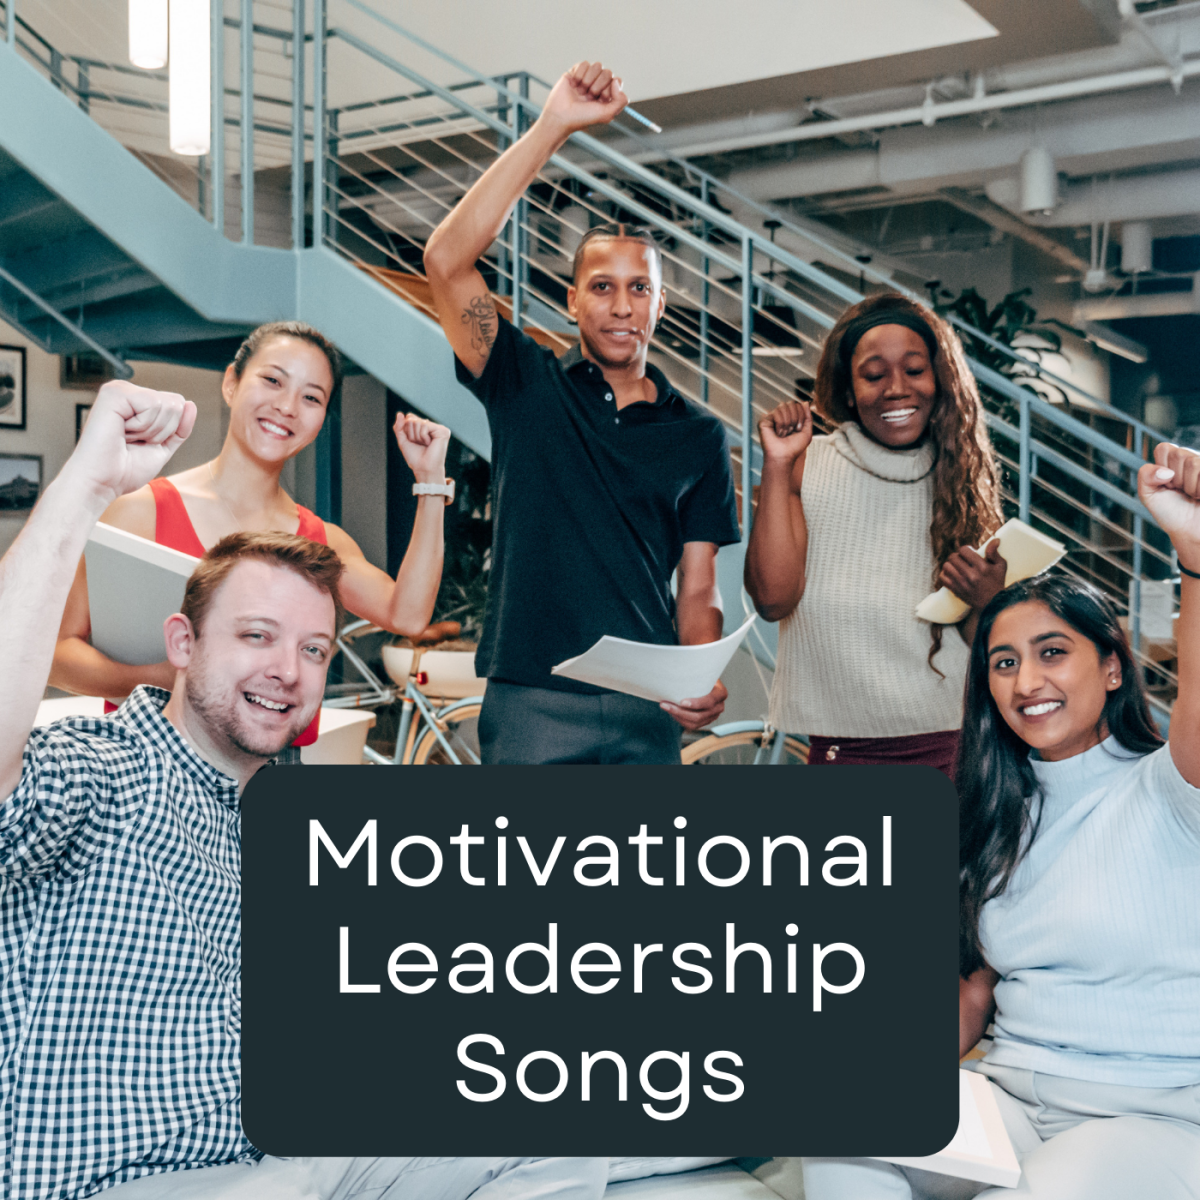 55 Motivational Leadership Songs Spinditty